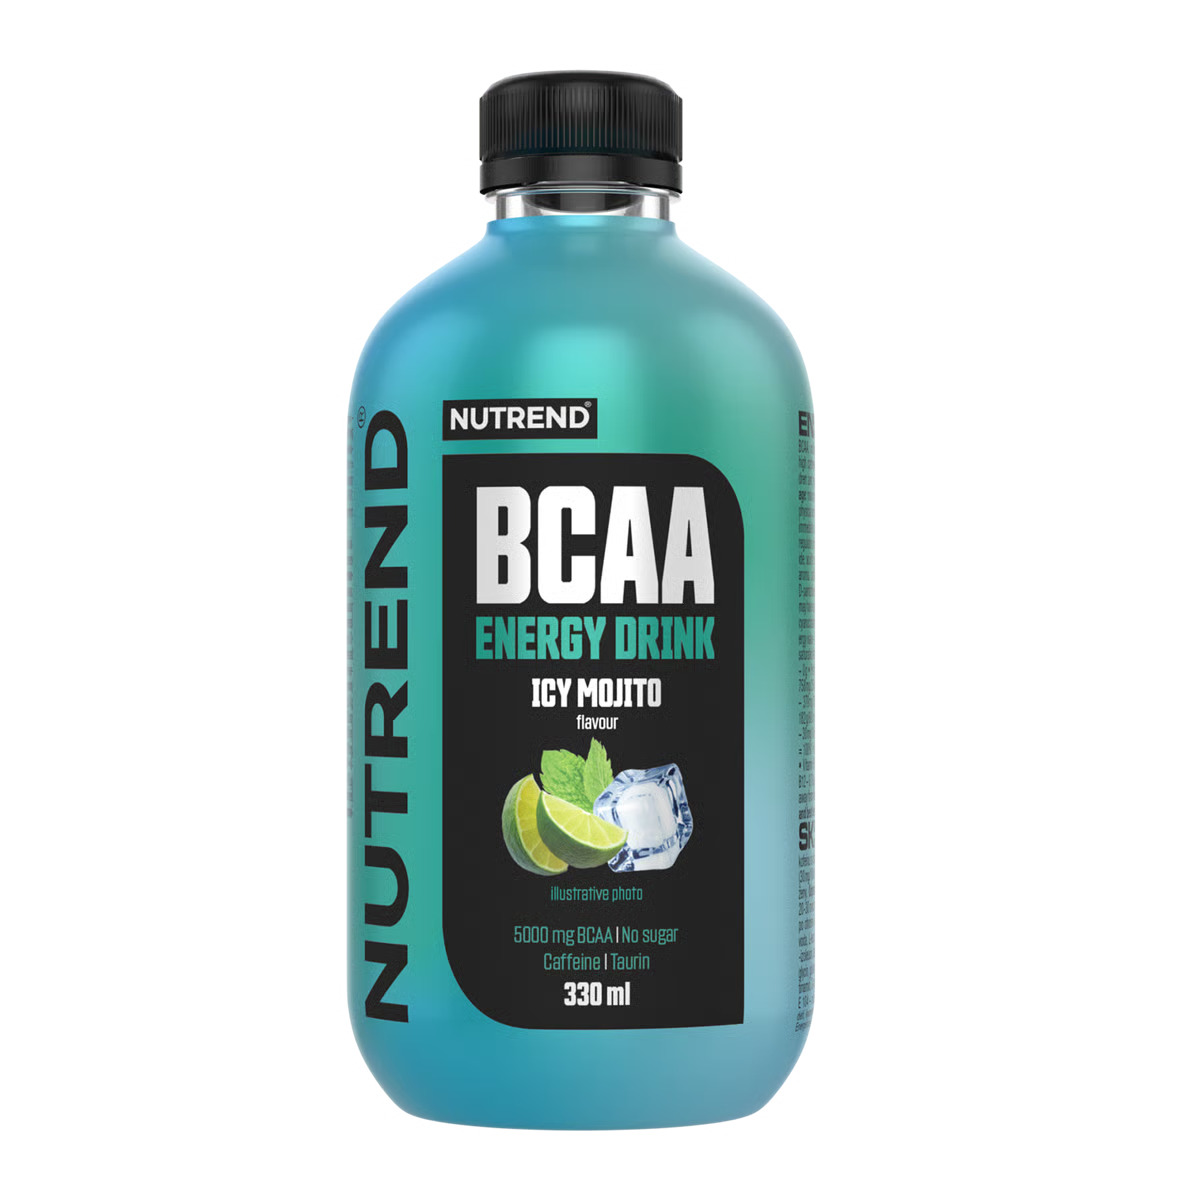 NUTREND BCAA ENERGY DRINK 330 ml mojito